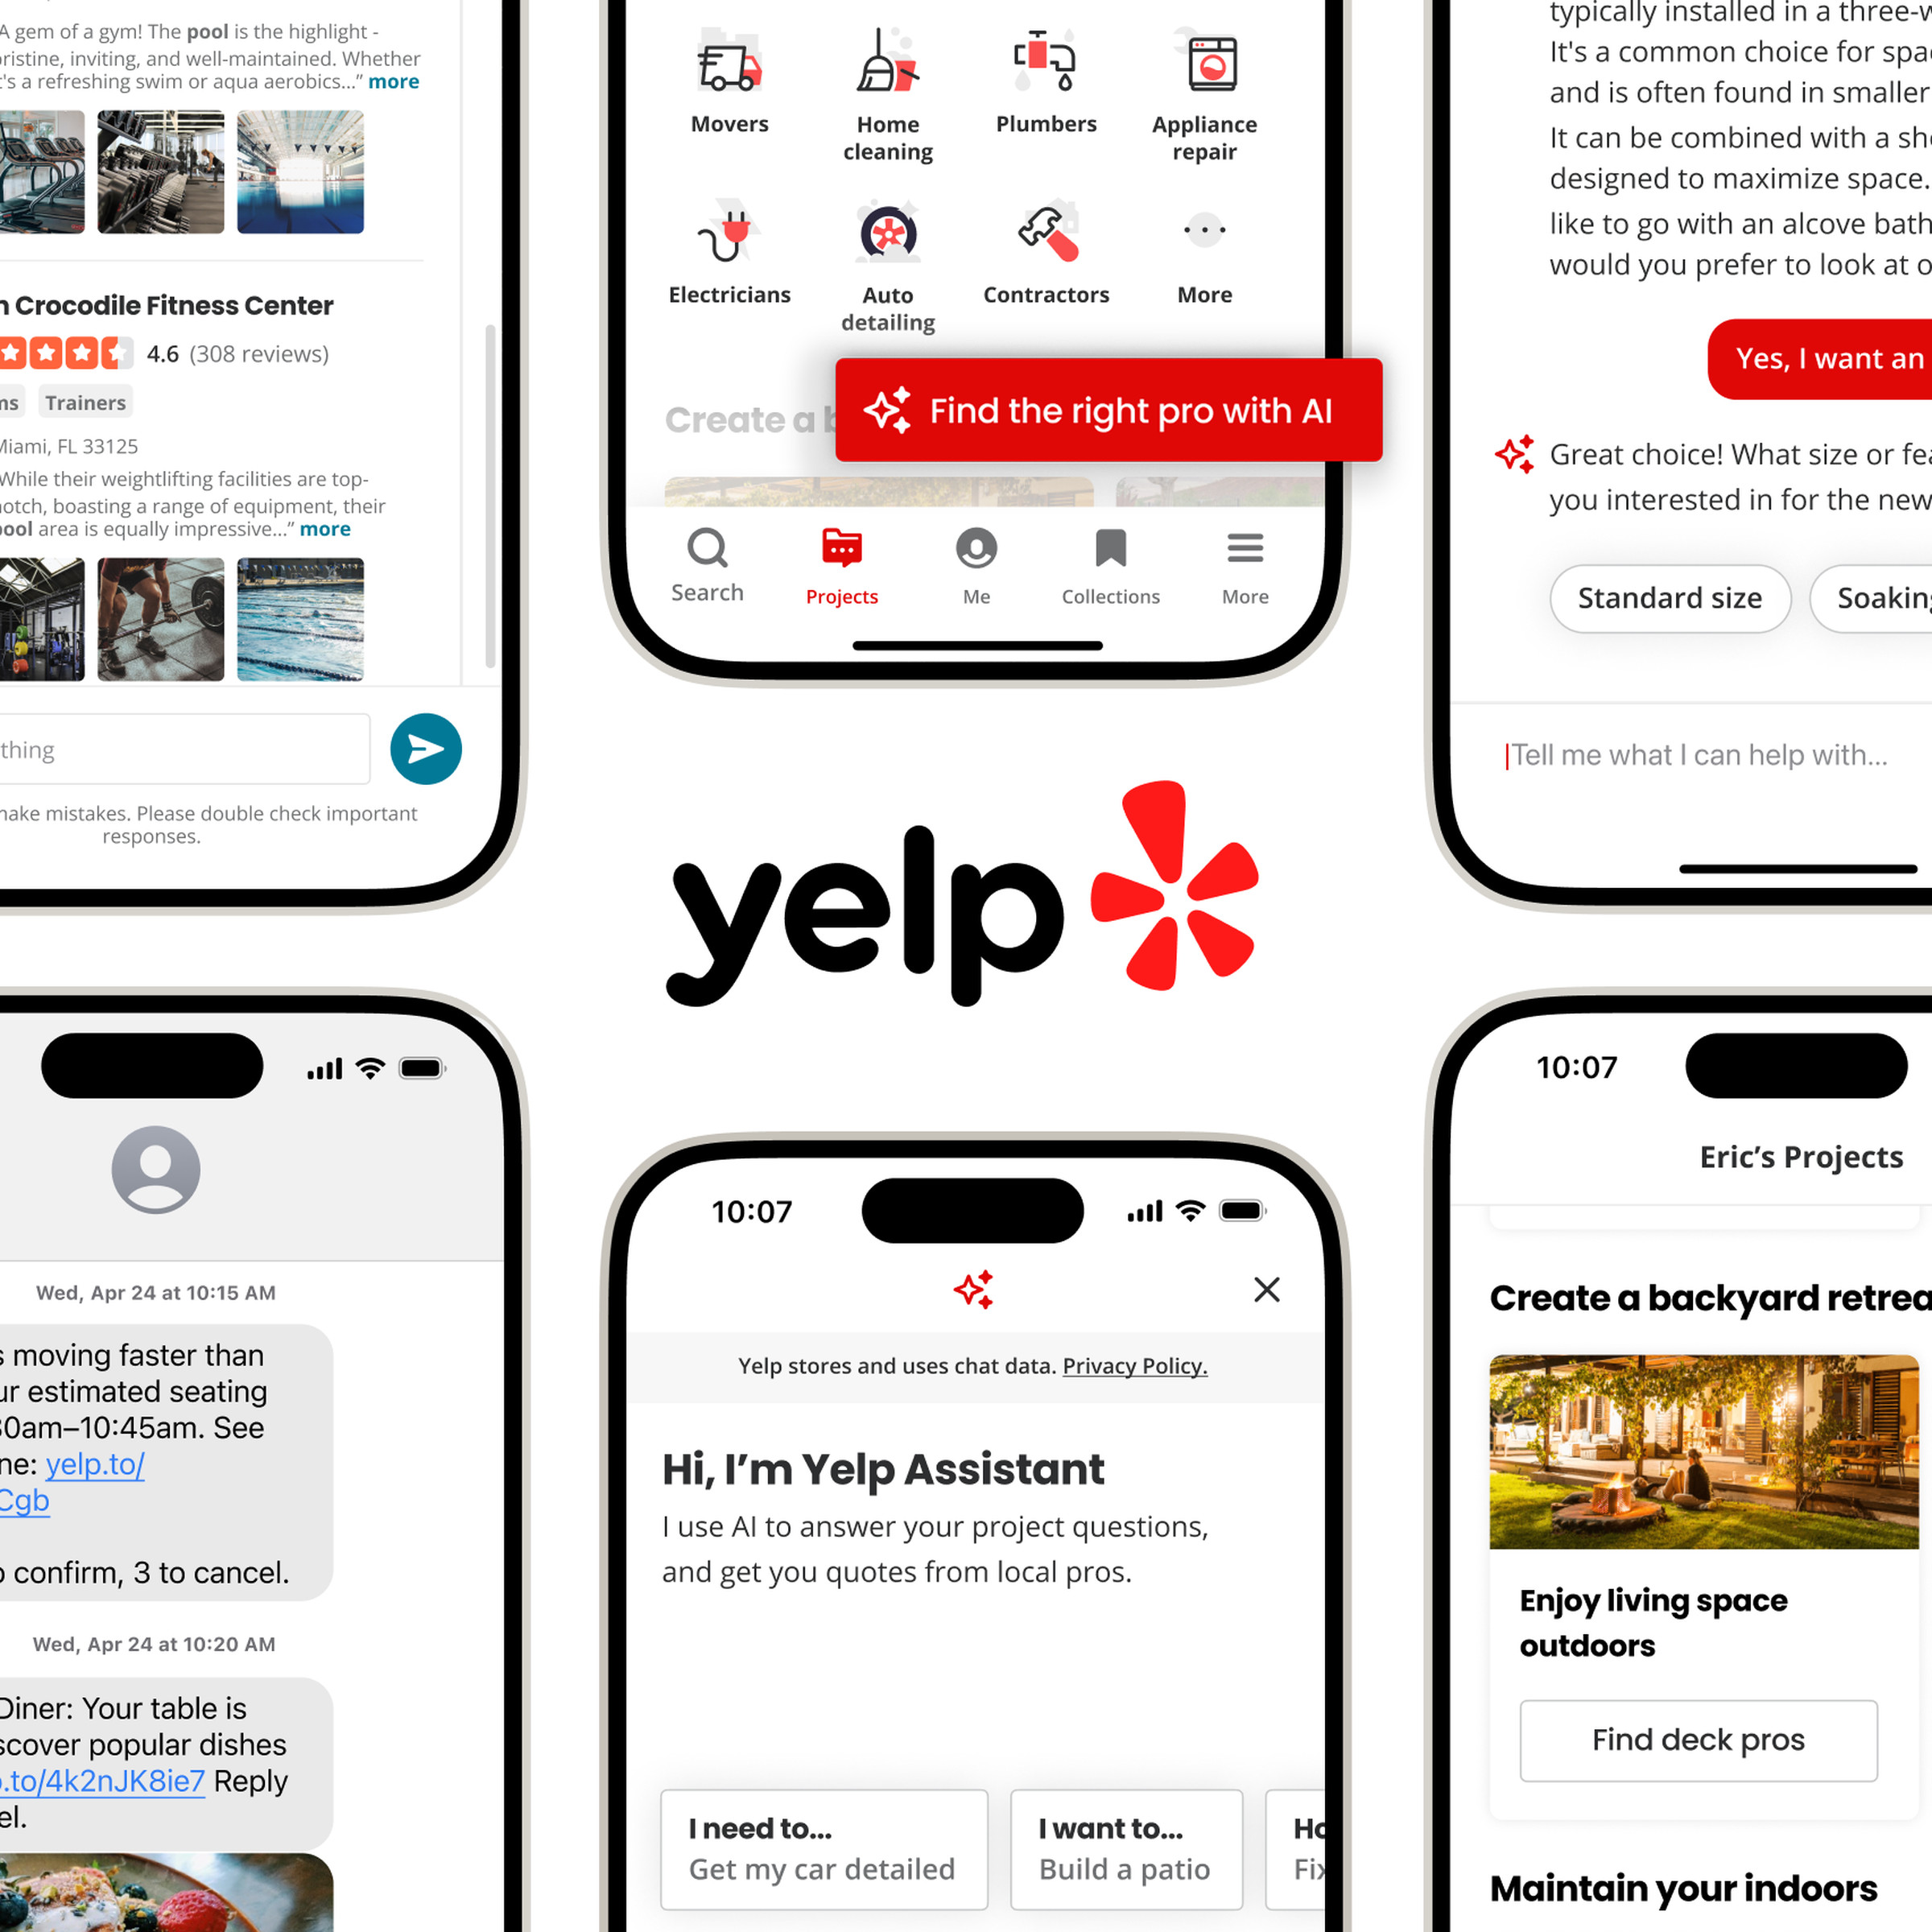 All of Yelp’s updates for spring.